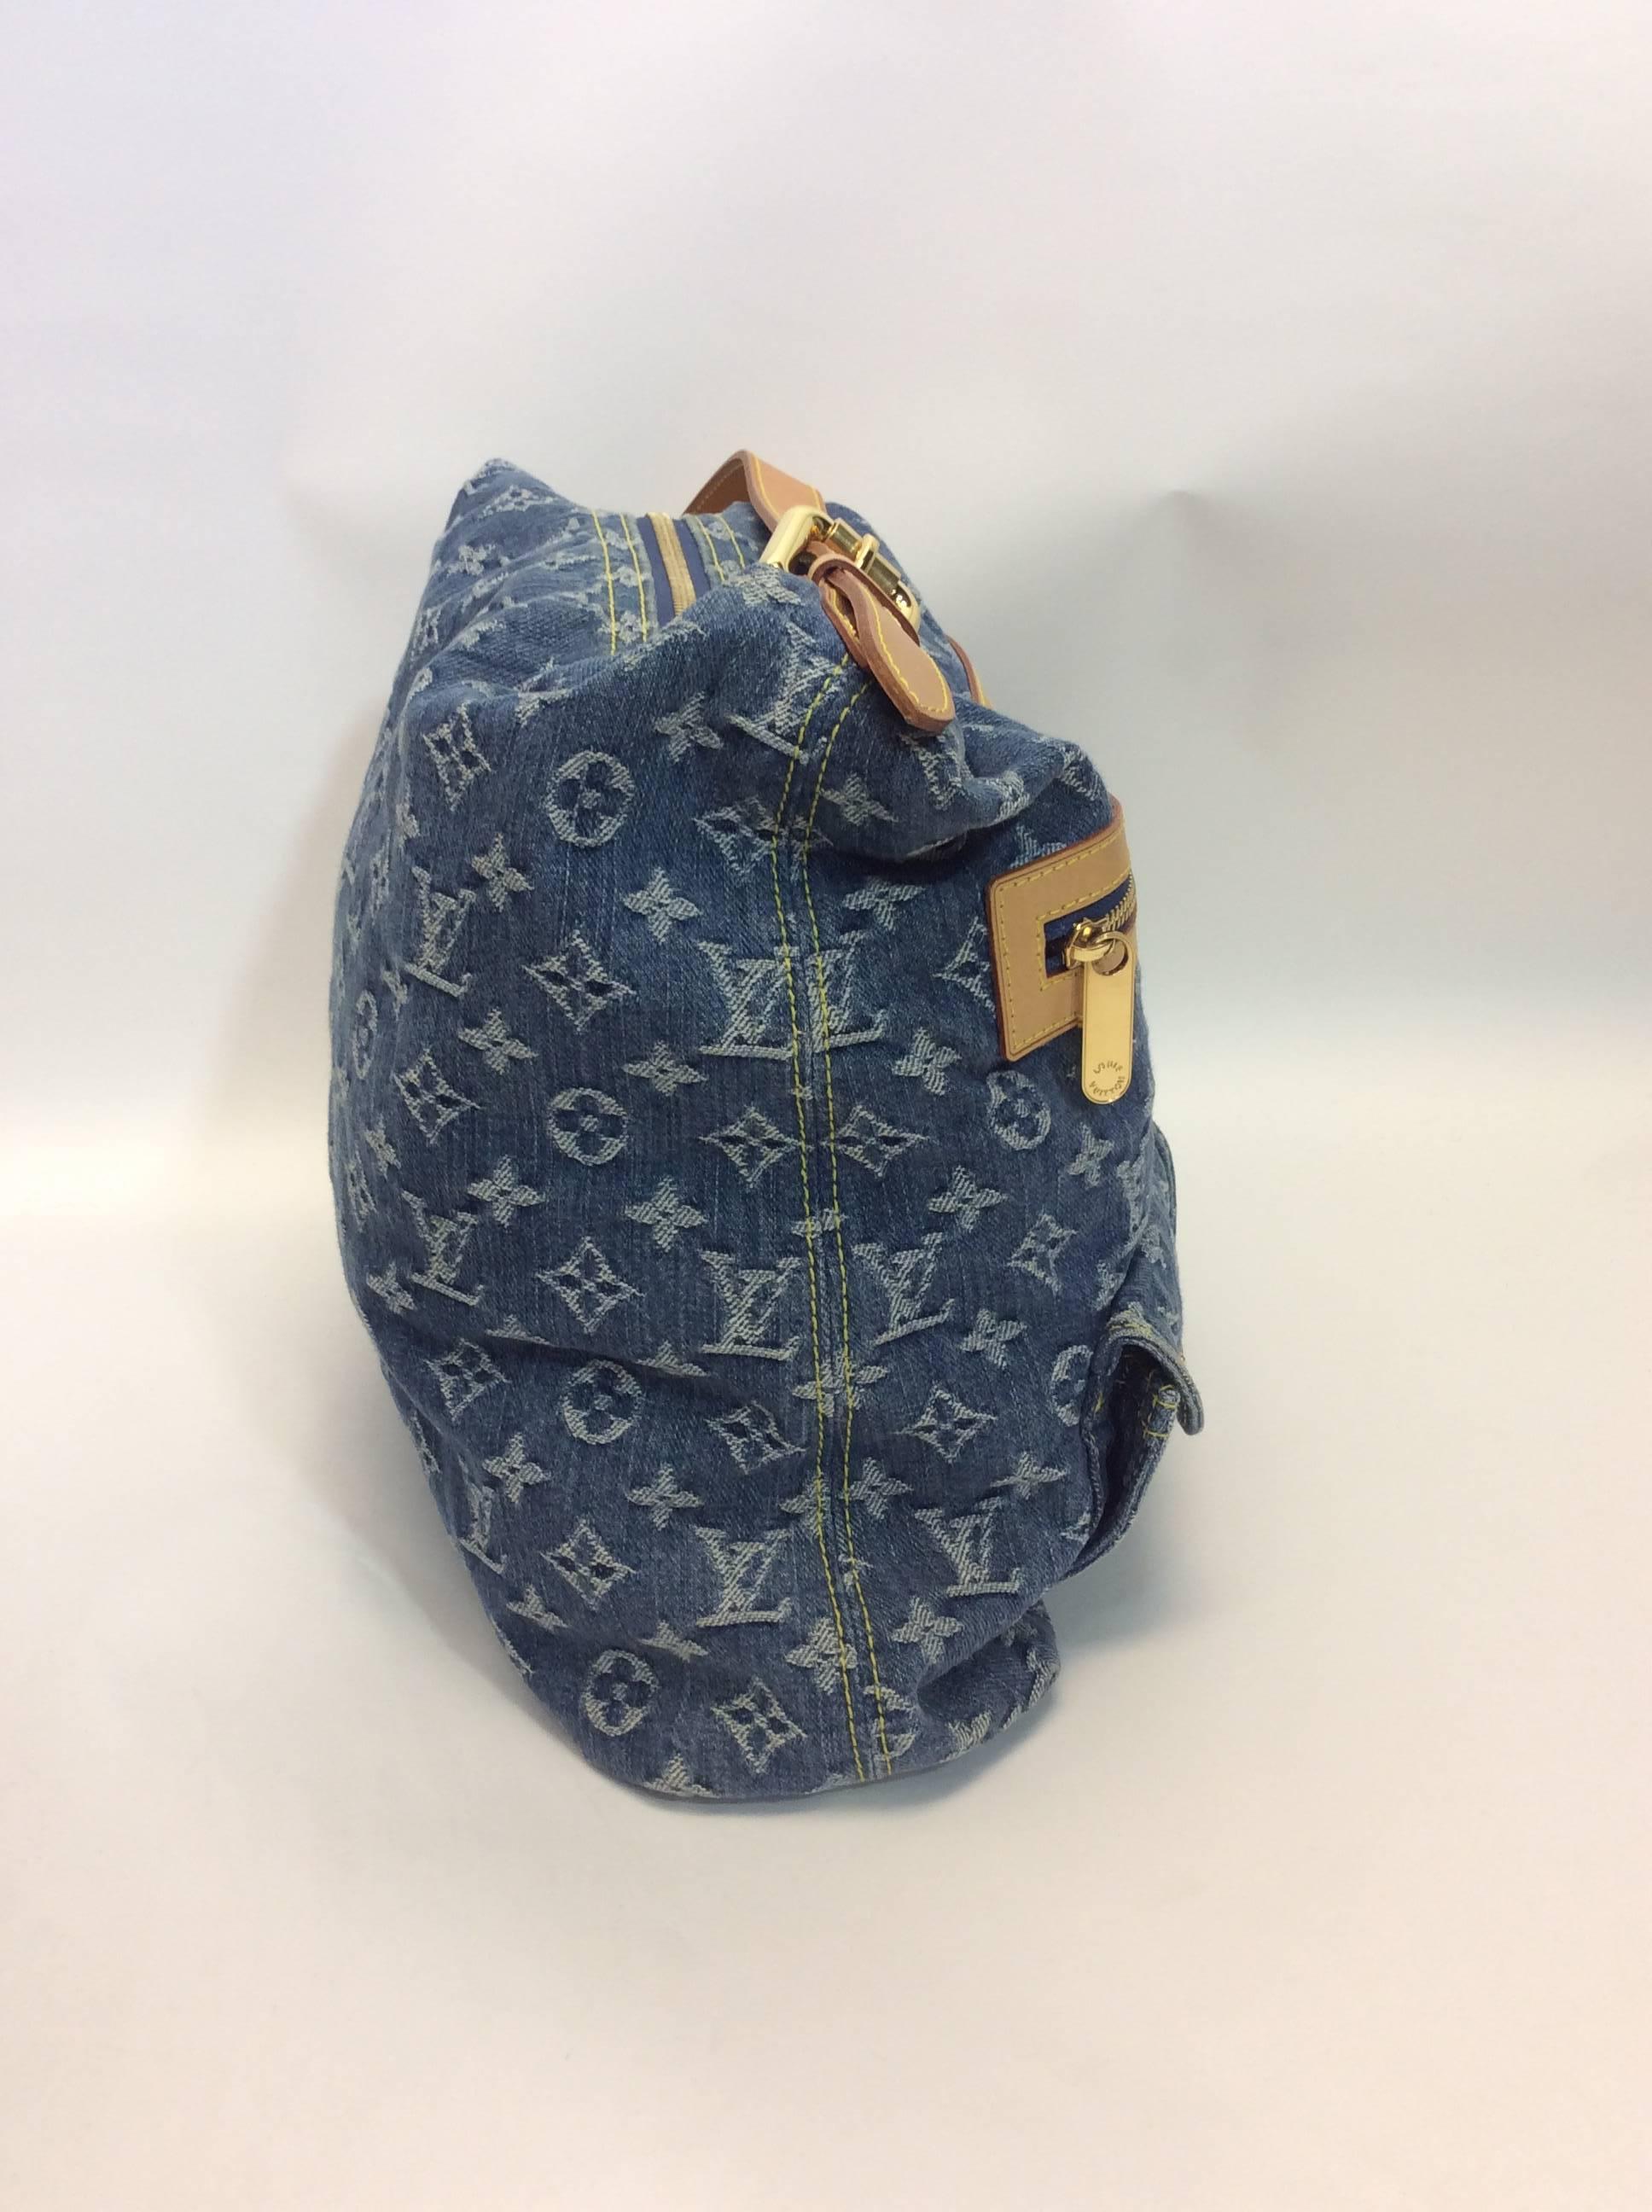 Louis Vuitton Denim Monogram Bag  In Excellent Condition For Sale In Narberth, PA